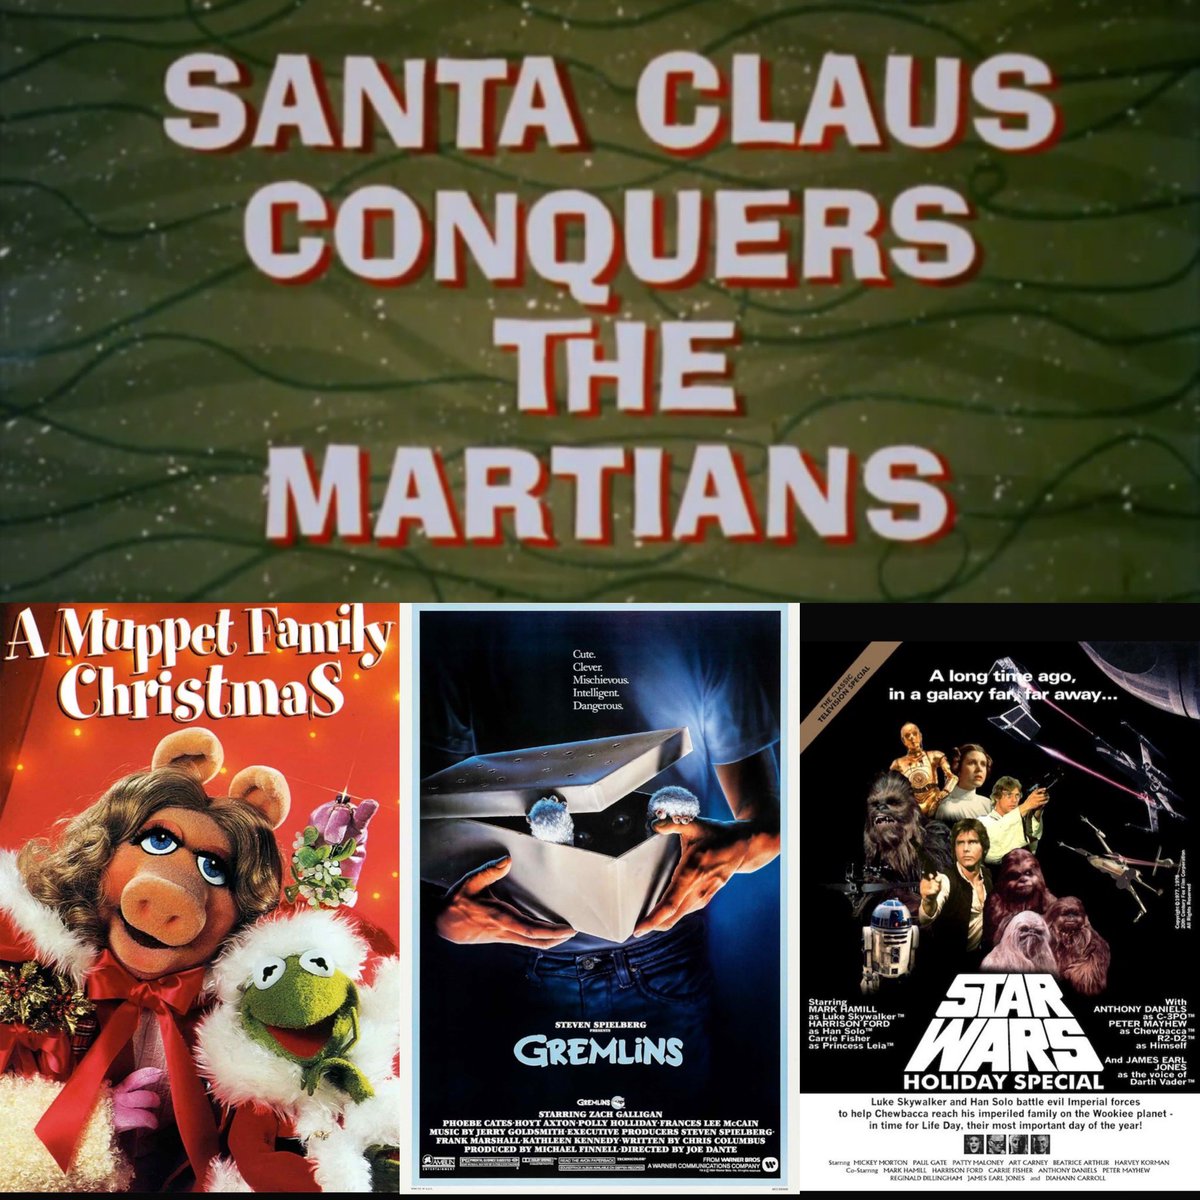 Catch our Santa Claus Conquers the Martians (1964) chat🎅🏻 LINK IN BIO 👽 #ChatflixRecommends these… #AMuppetFamilyChristmas #PeterHarris #JimHenson #Gremlins @joe_dante @zwgman #StarWarsHolidaySpecial #SteveBinder @MarkHamill #LukeSkywalker